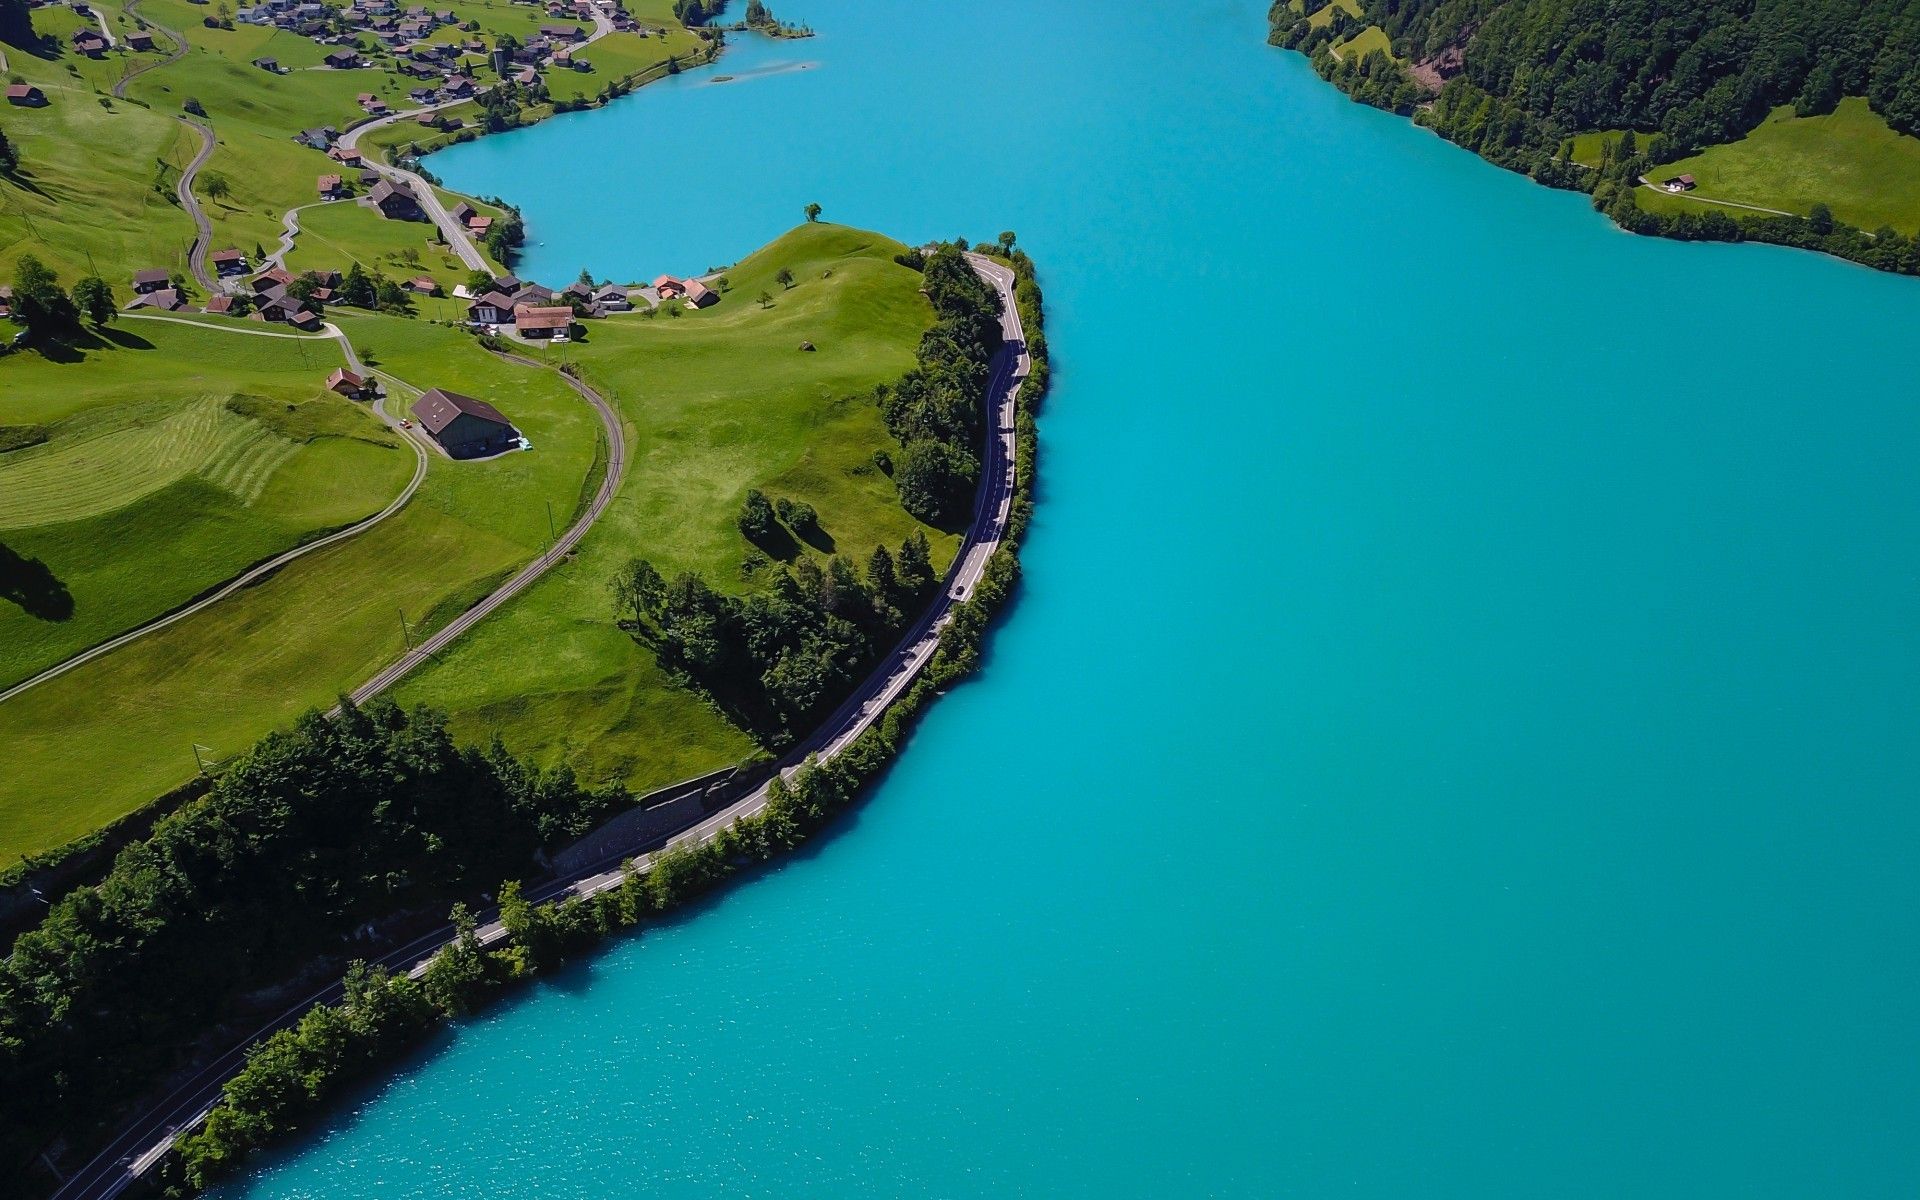 Download 1920x1200 Switzerland, Lake, Village, Blue Water, Top View, Green, Aerial View Wallpaper for MacBook Pro 17 inch